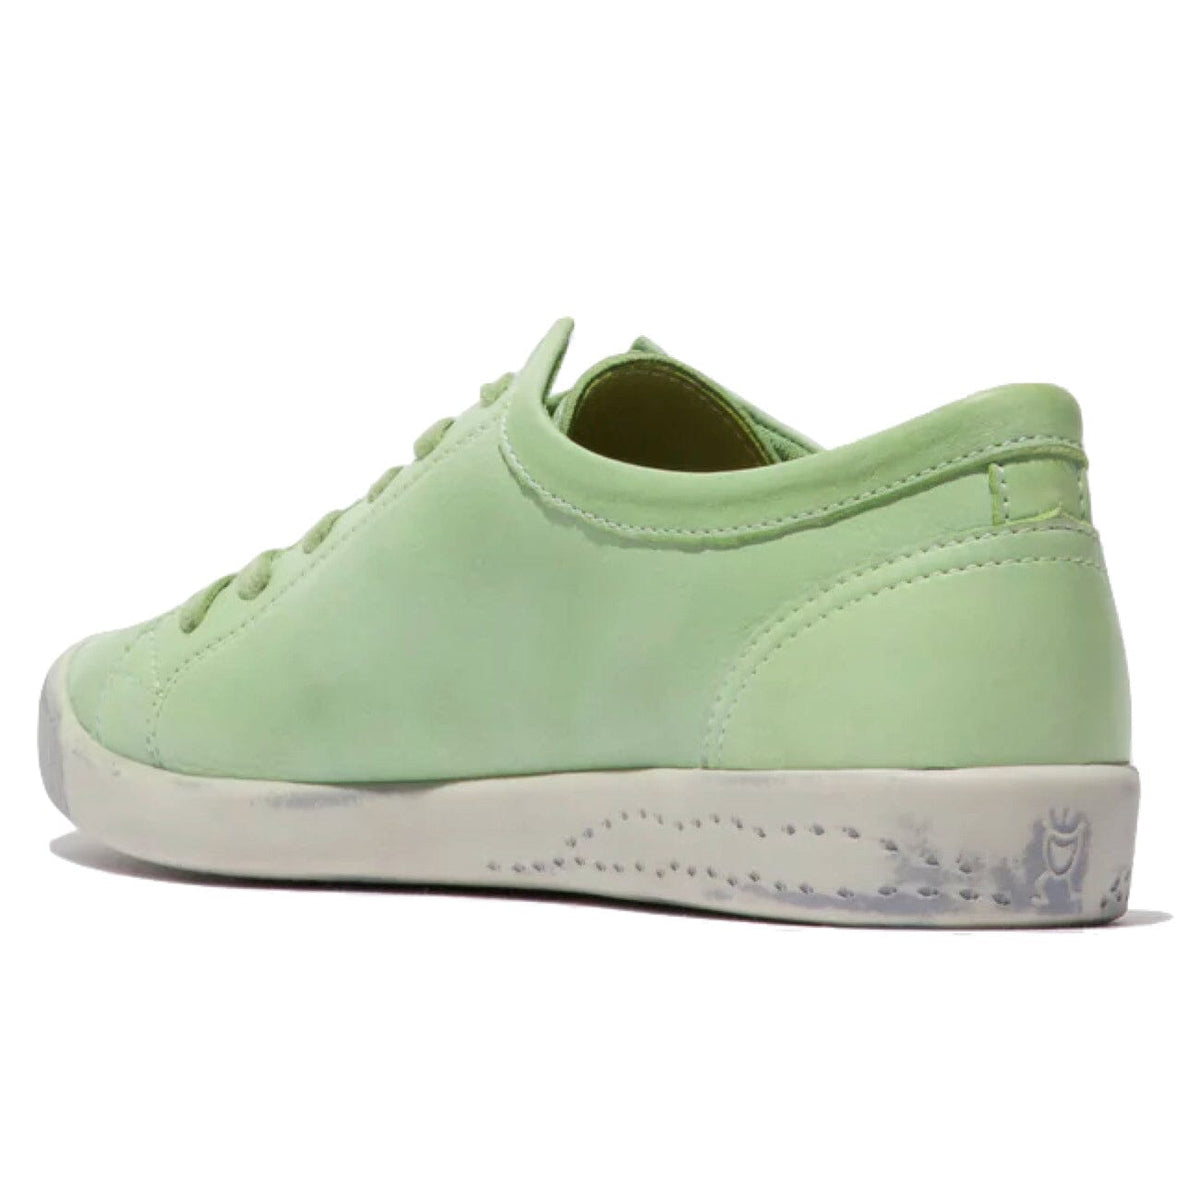 Softinos, Isla154, Laceup Shoe, Washed Leather, Light Green Shoes Softinos 